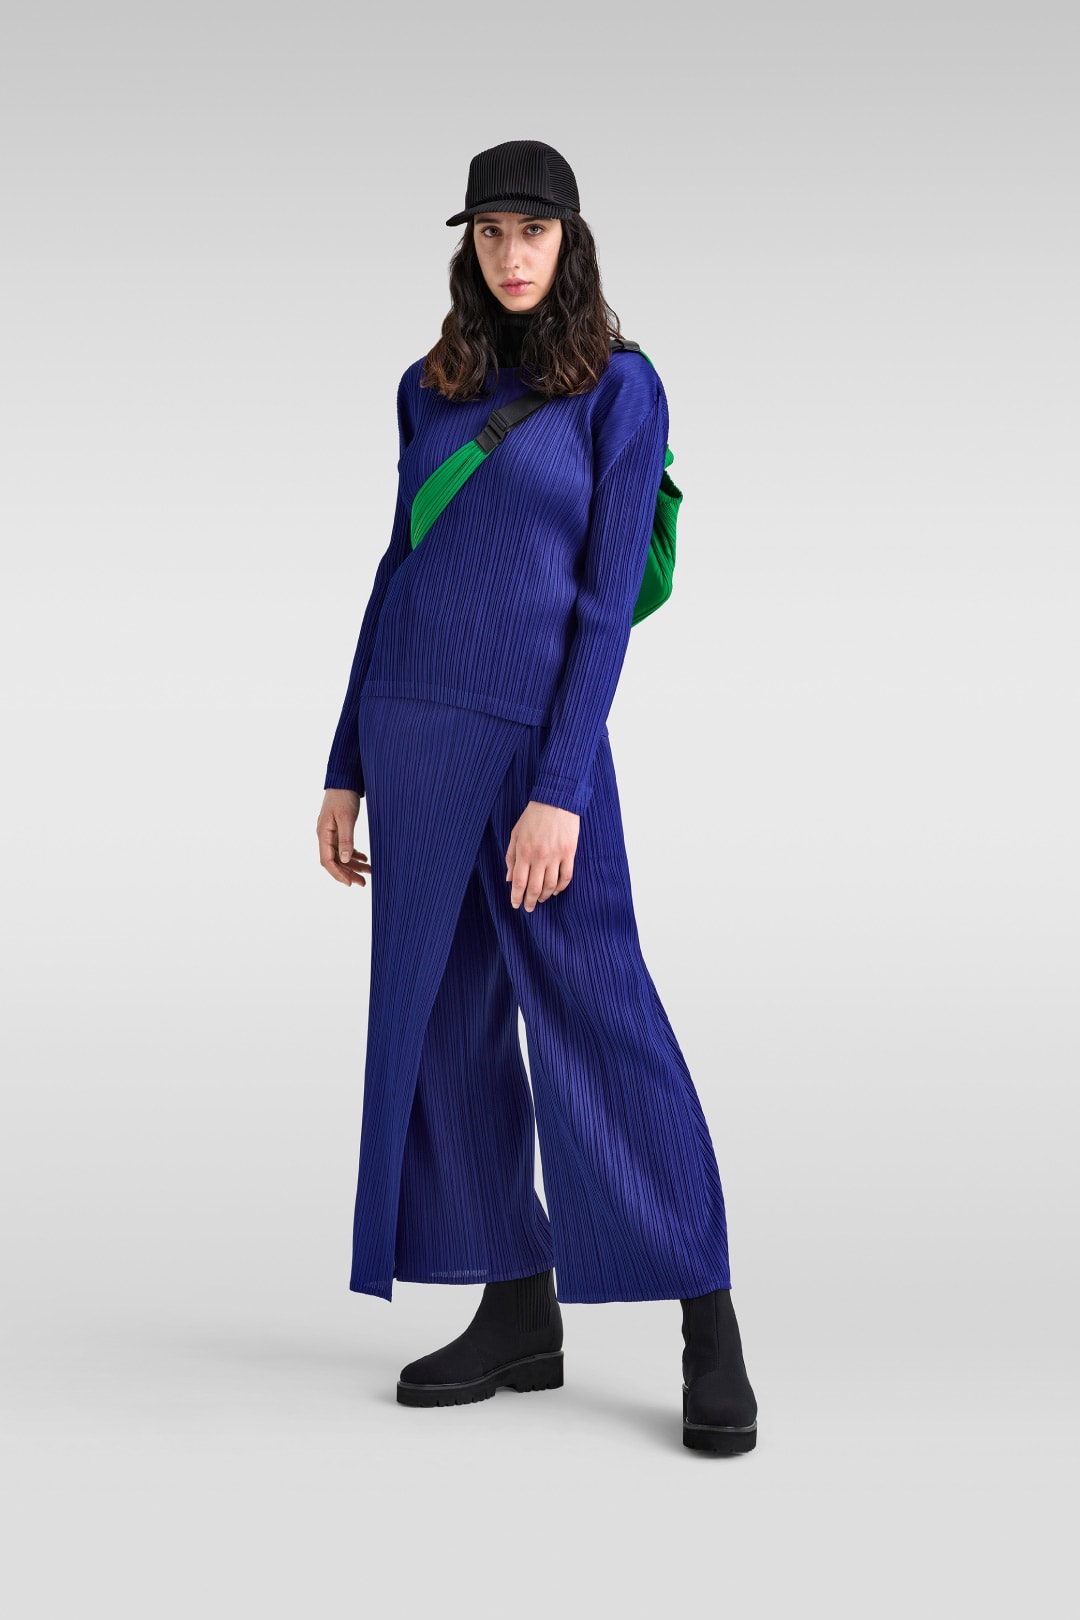 issey miyake new pleats please collection colorful pieces silhouettes cheers series monthly colors series sunset series pants dresses tops tunics